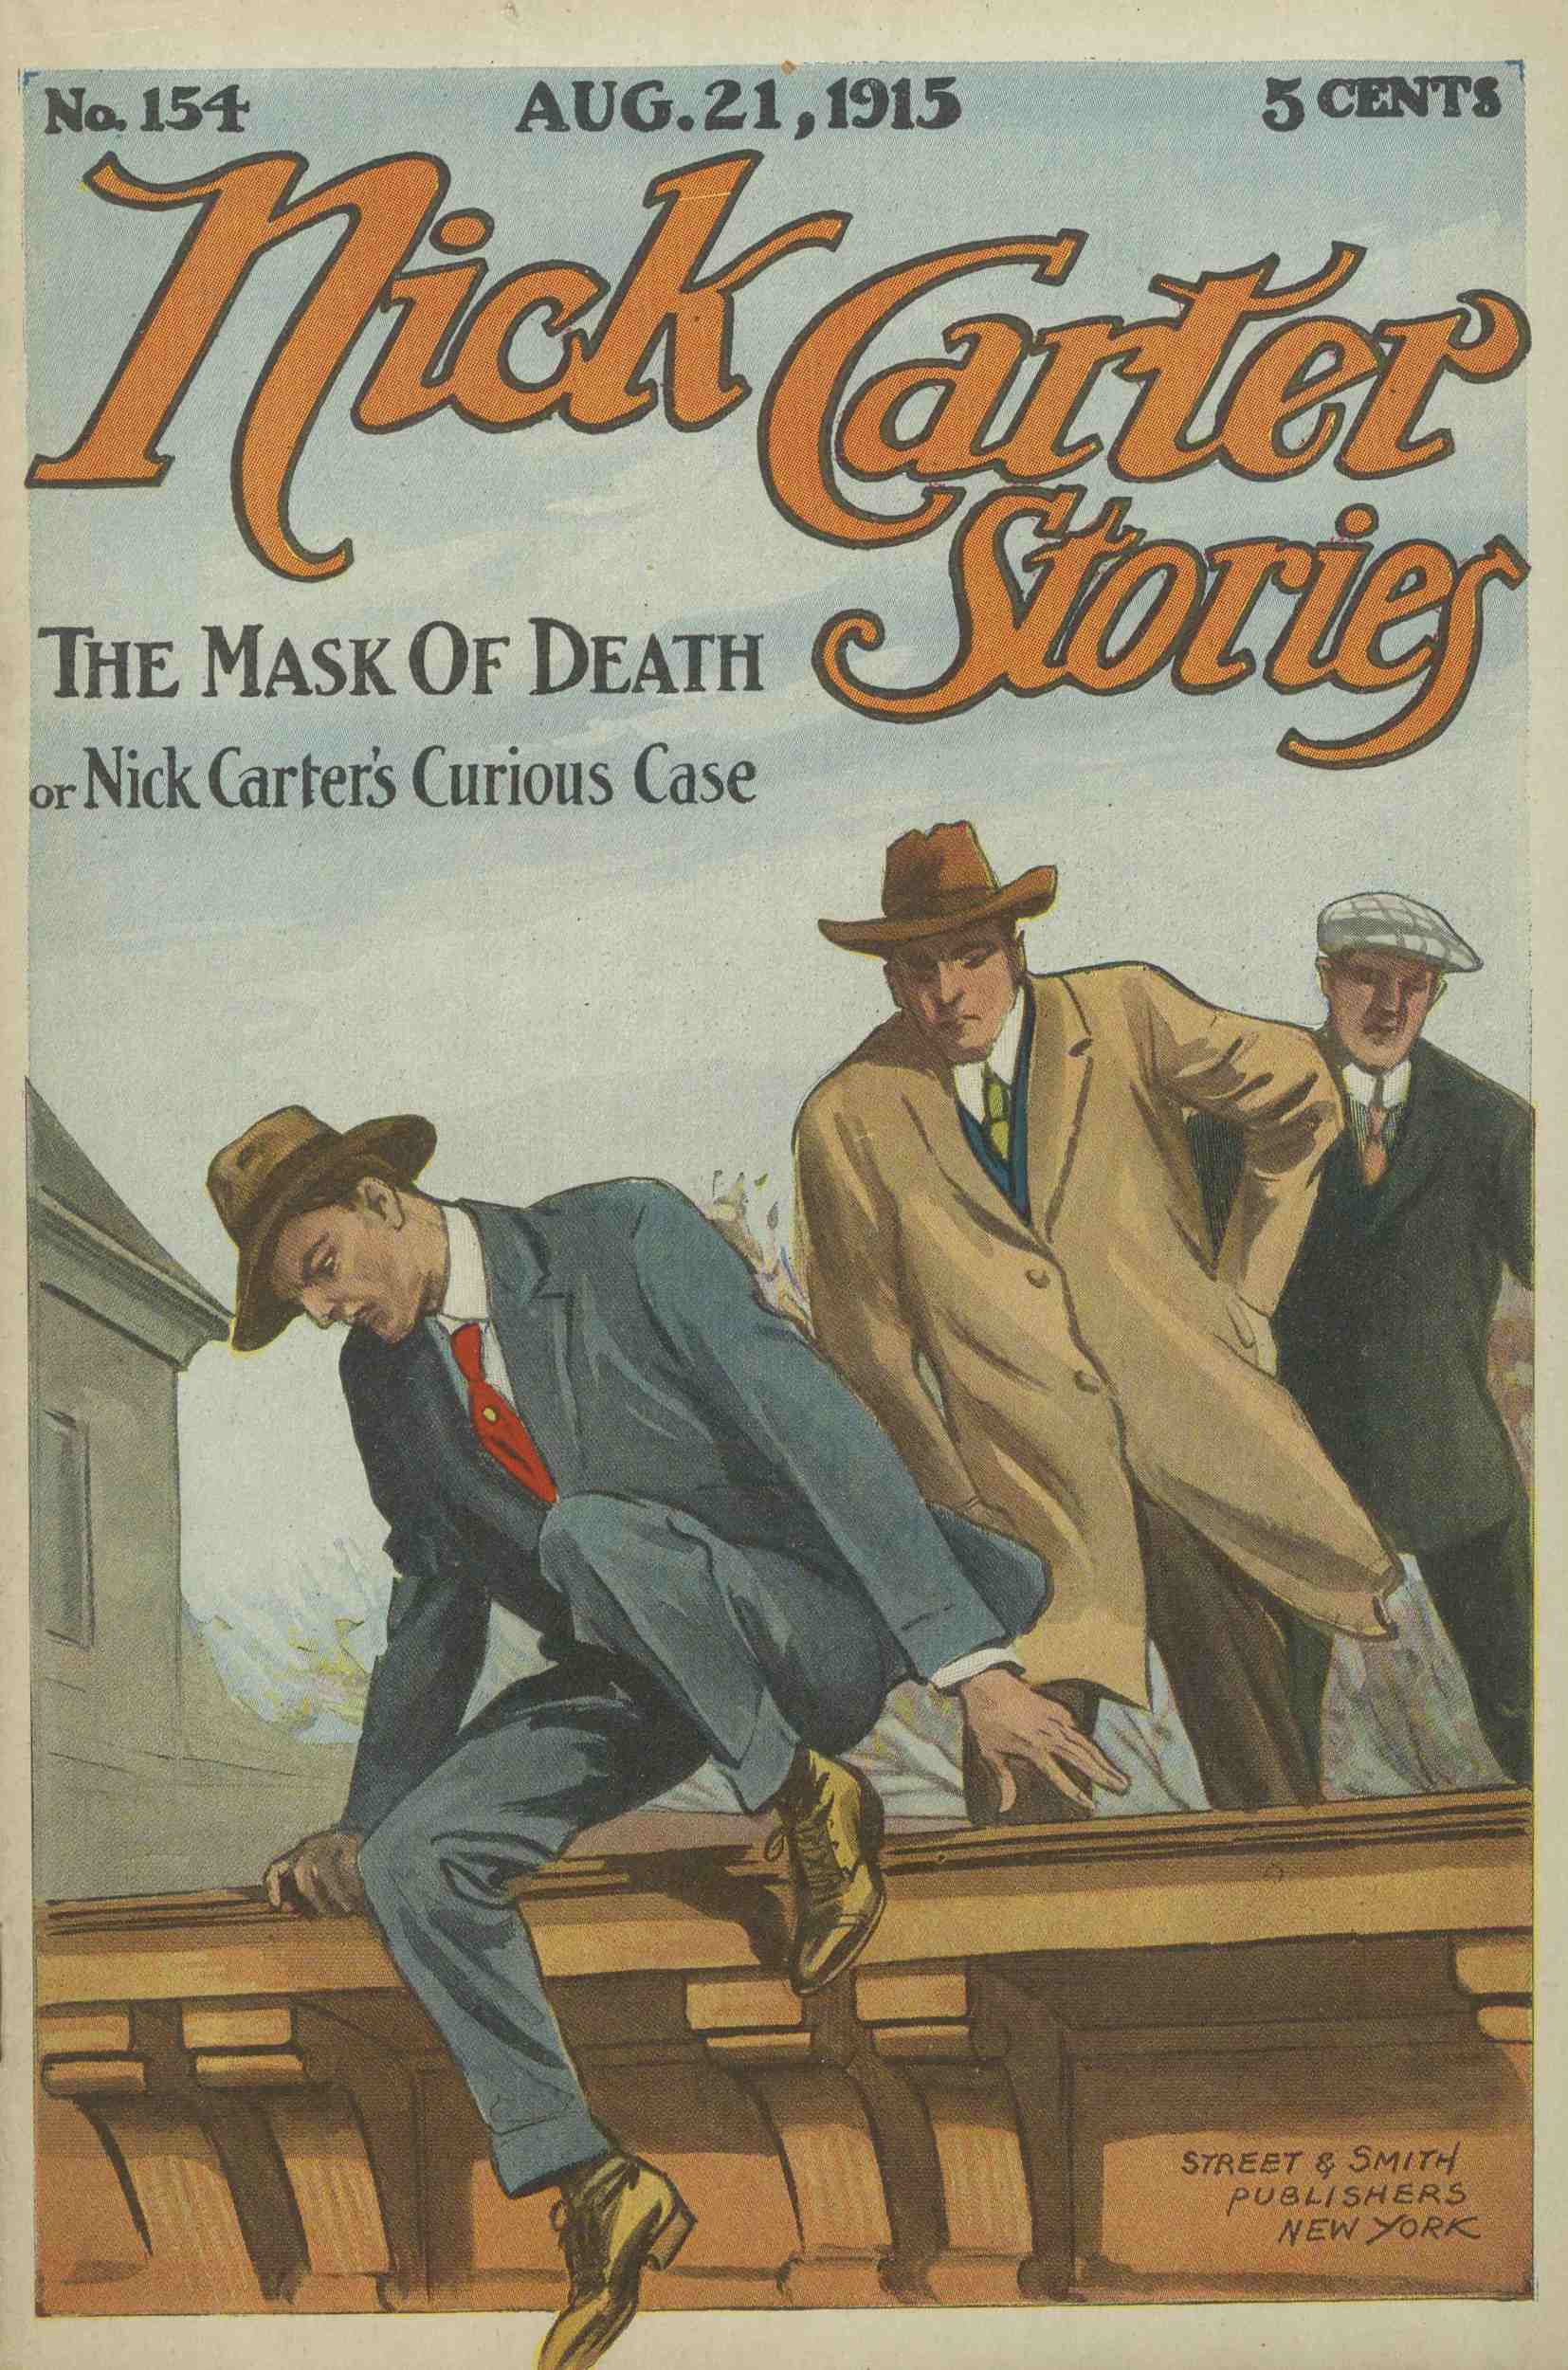 The Project Gutenberg eBook of The Mask of Death, by Nick Carter.